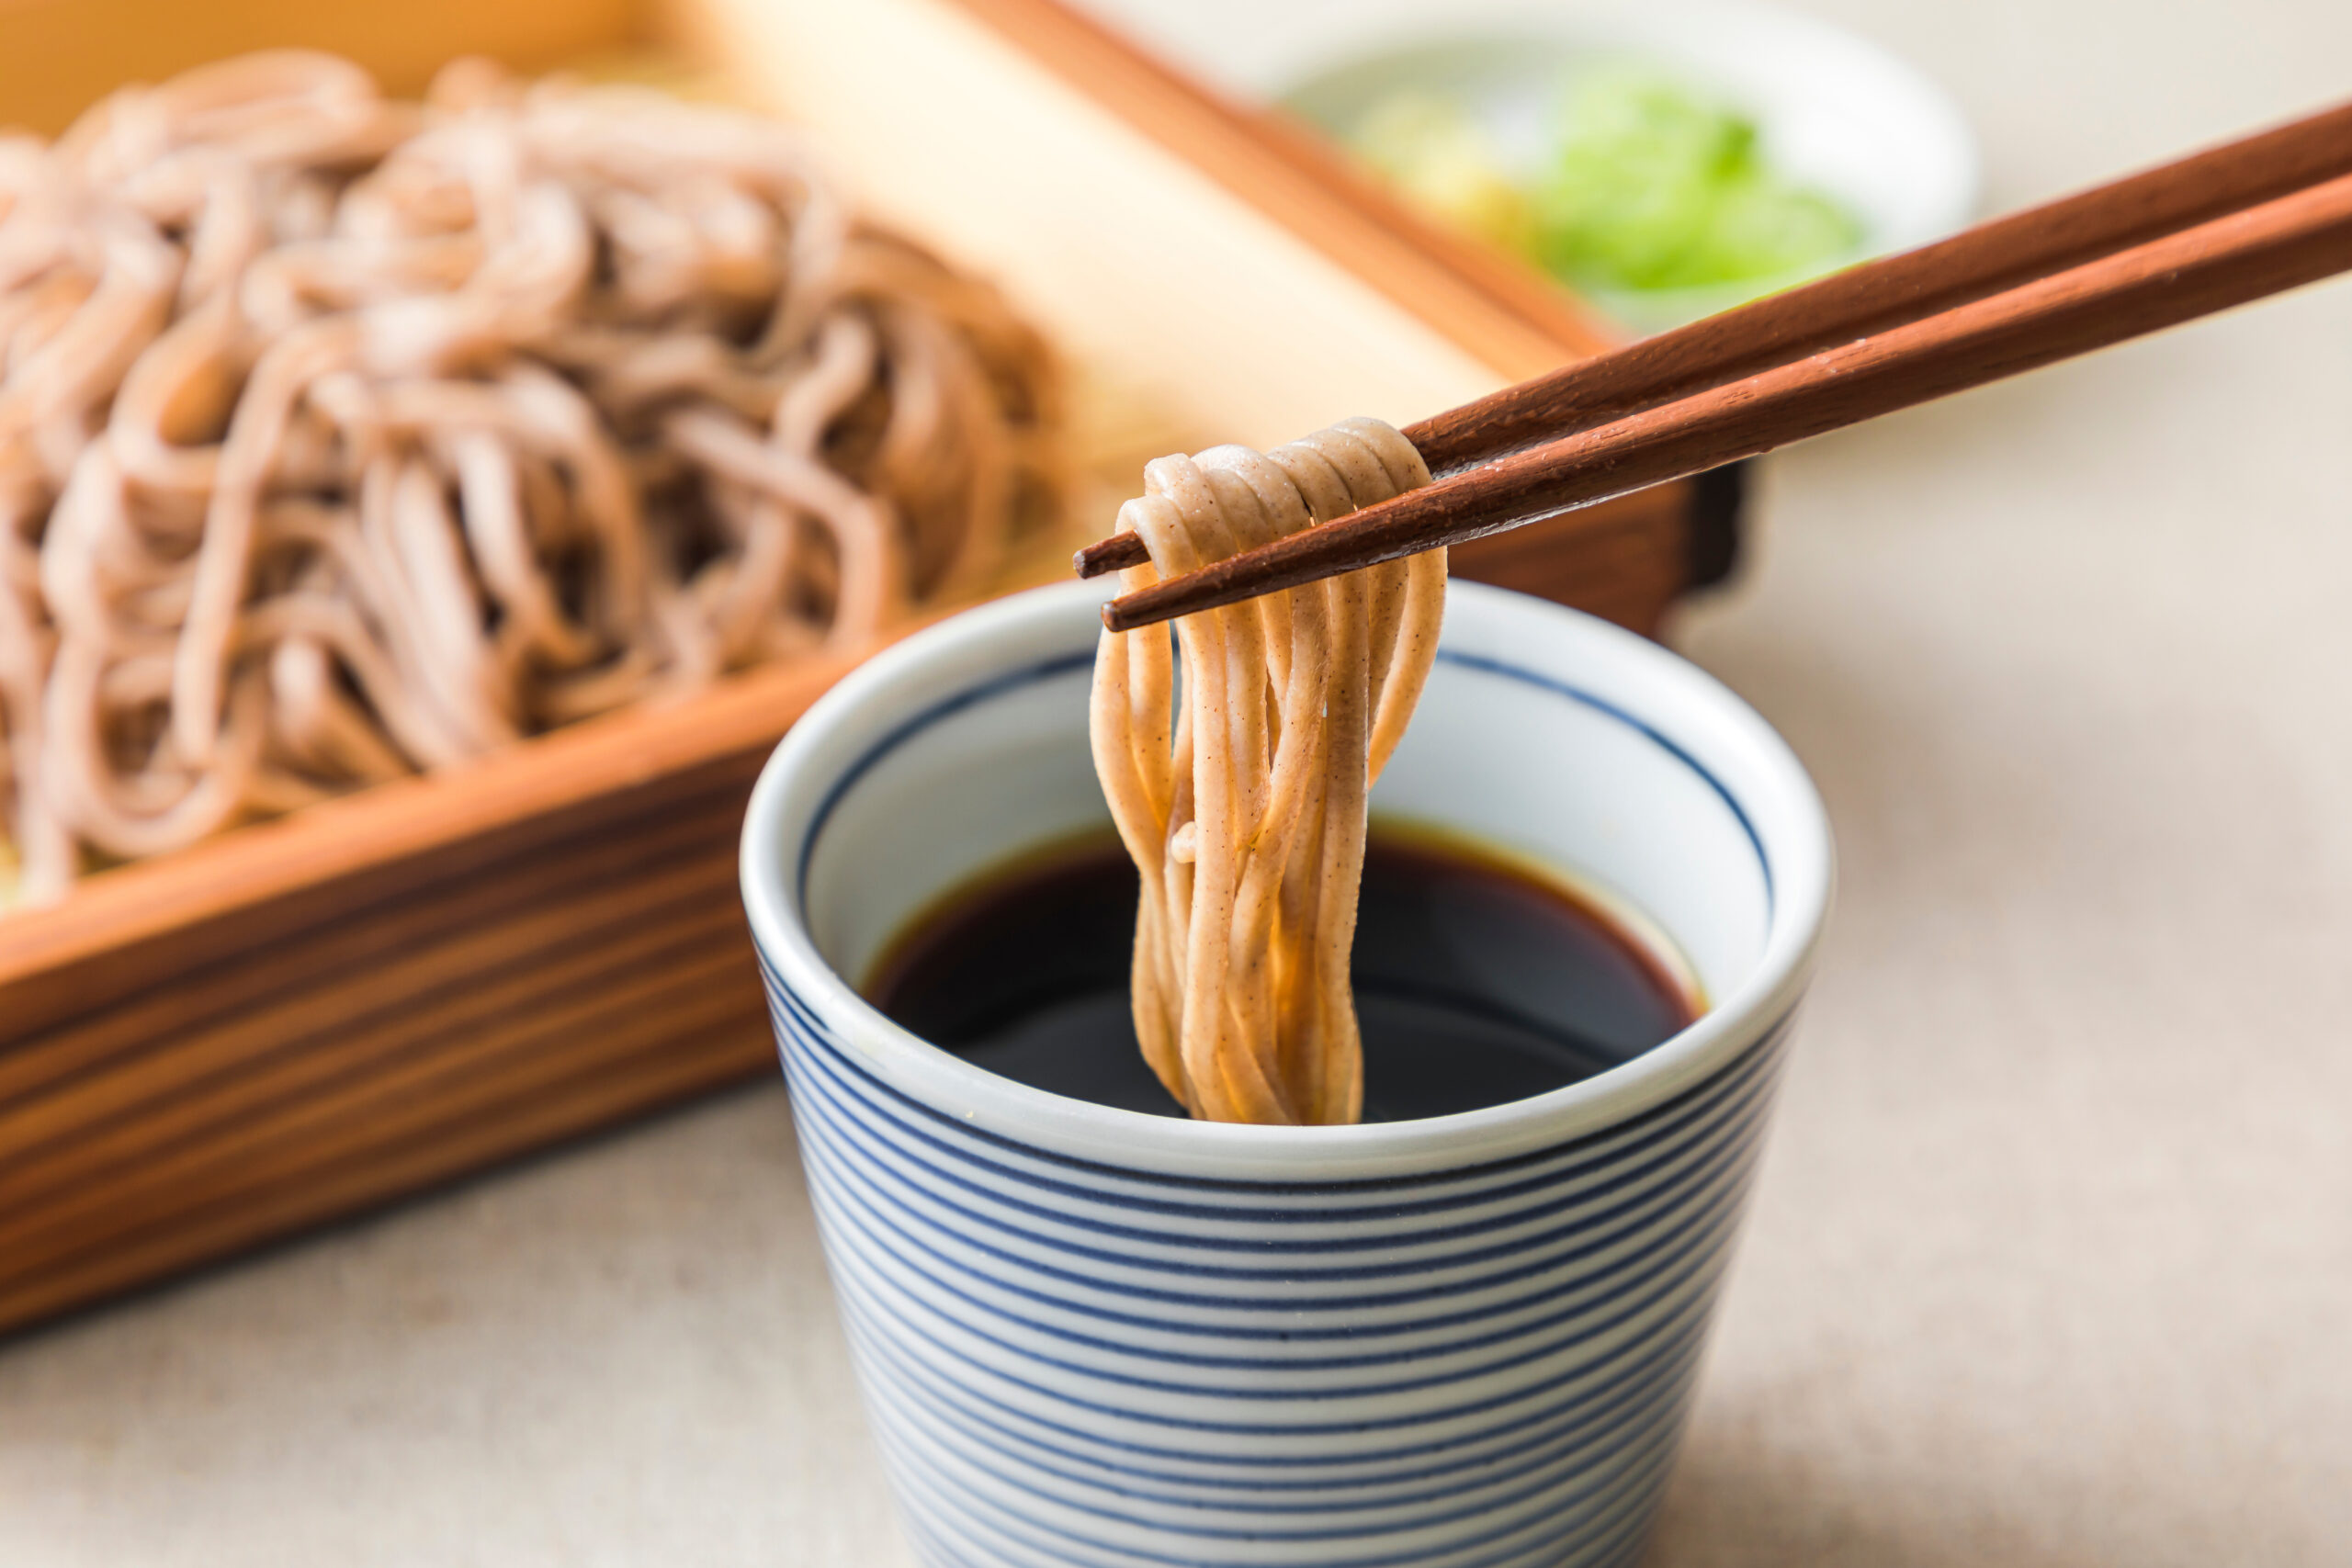 Japanese soba noodles with Mentsuyu